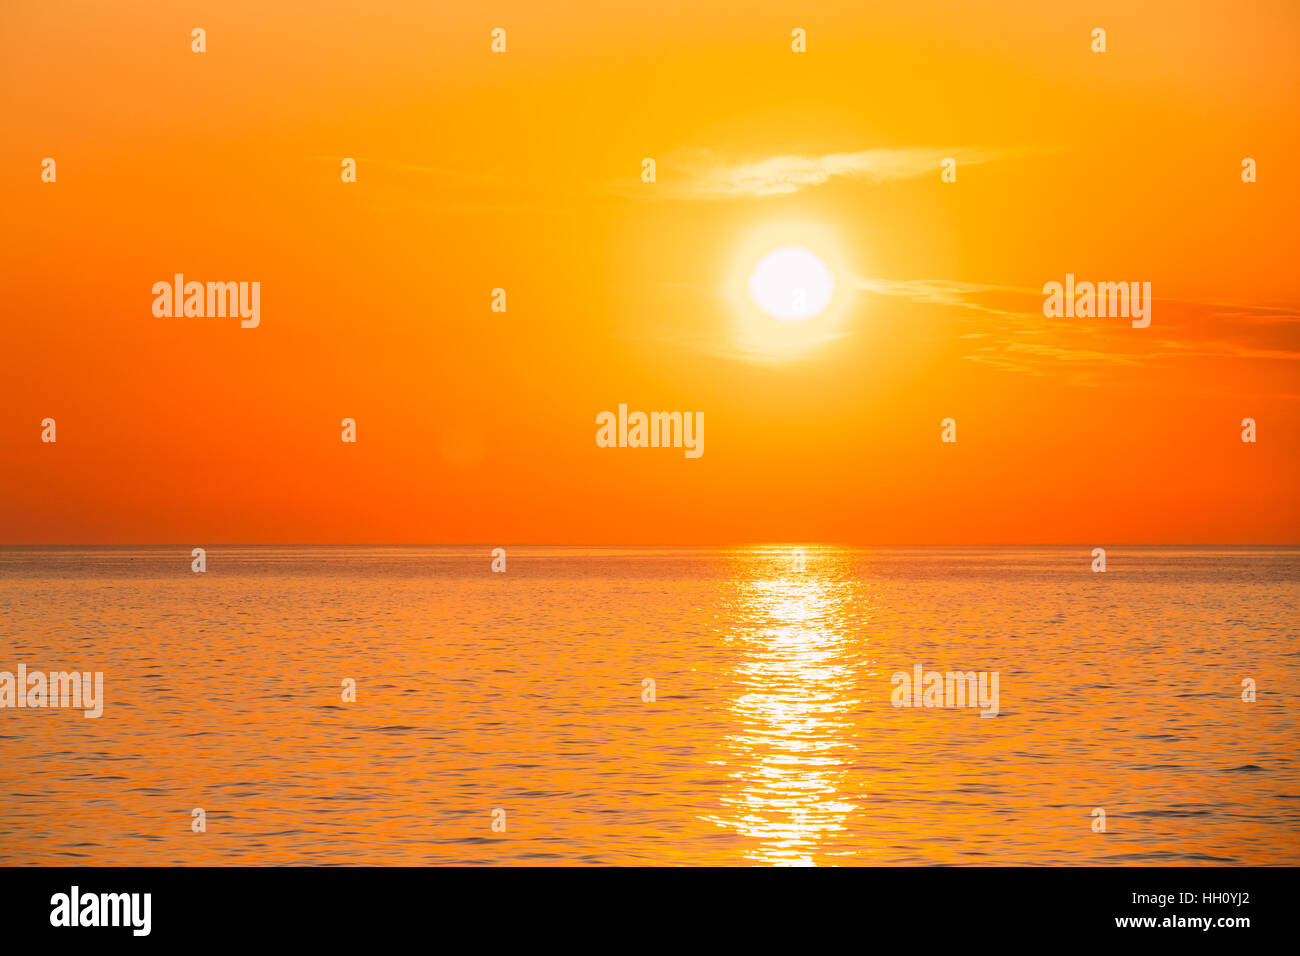 Sun Is Setting On Horizon At Sunset Sunrise Over Sea Or Ocean. Tranquil Sea Ocean Waves. Natural Sky Warm Colors. Stock Photo